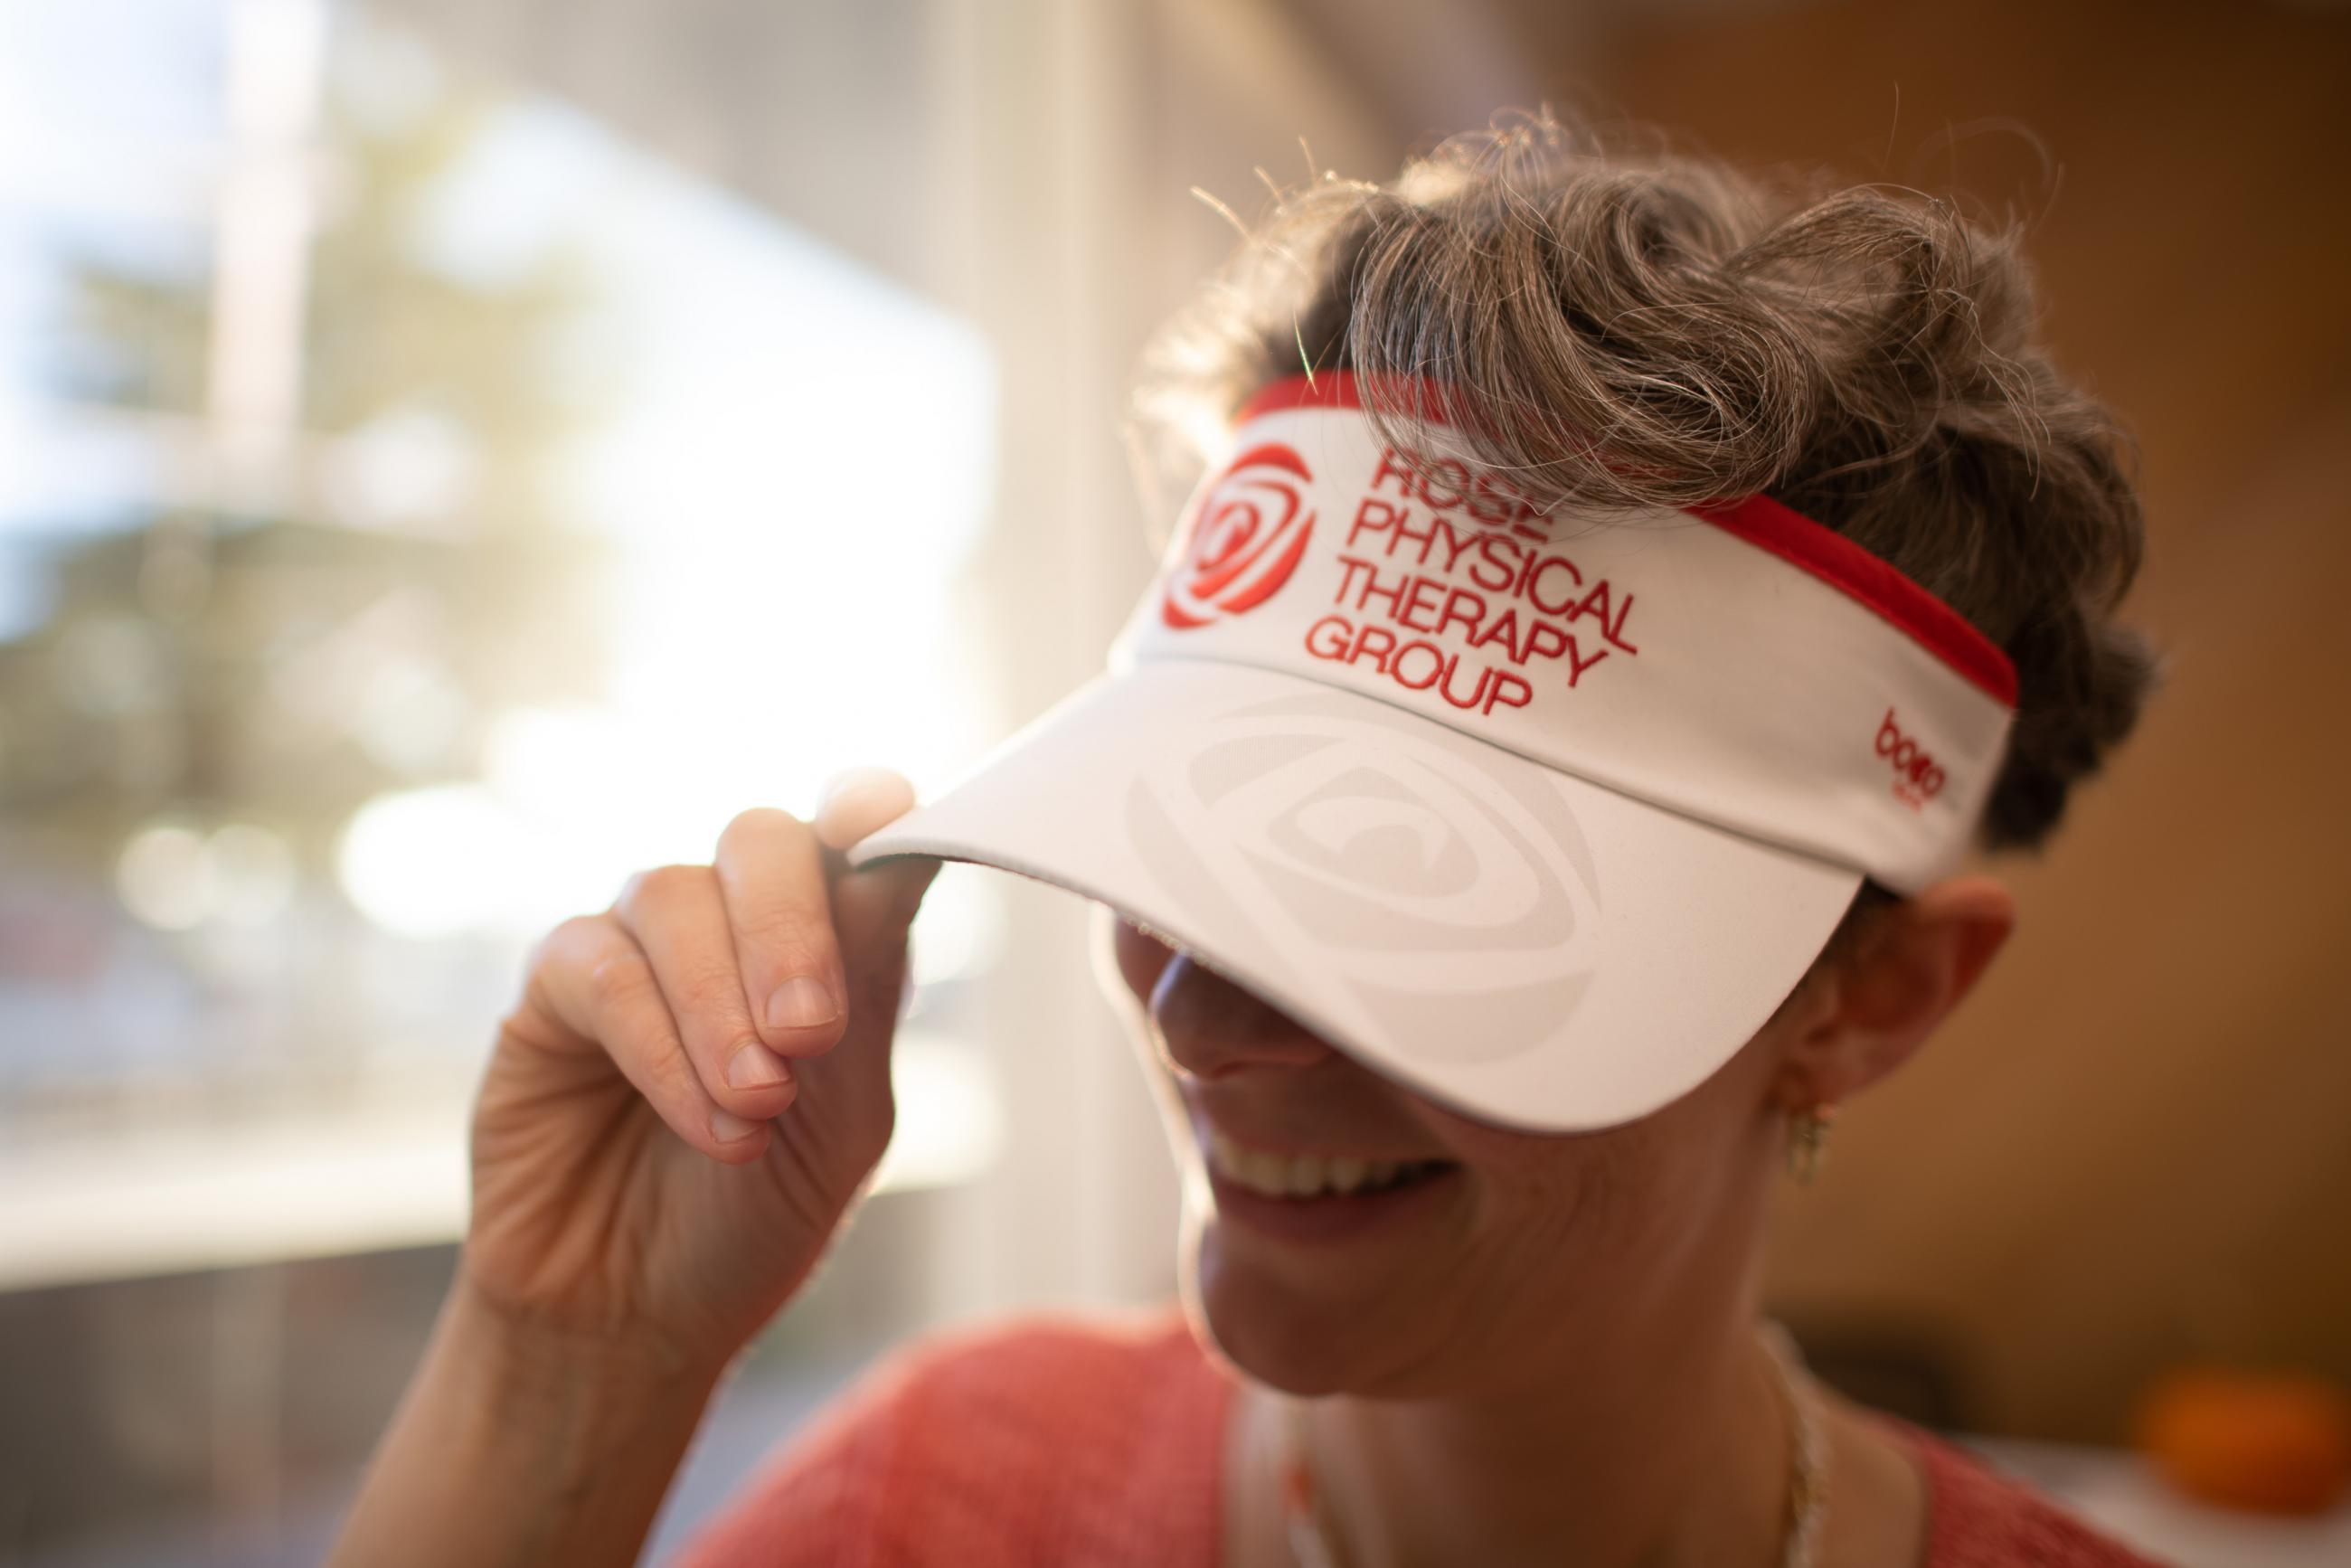 rose physical therapy visor